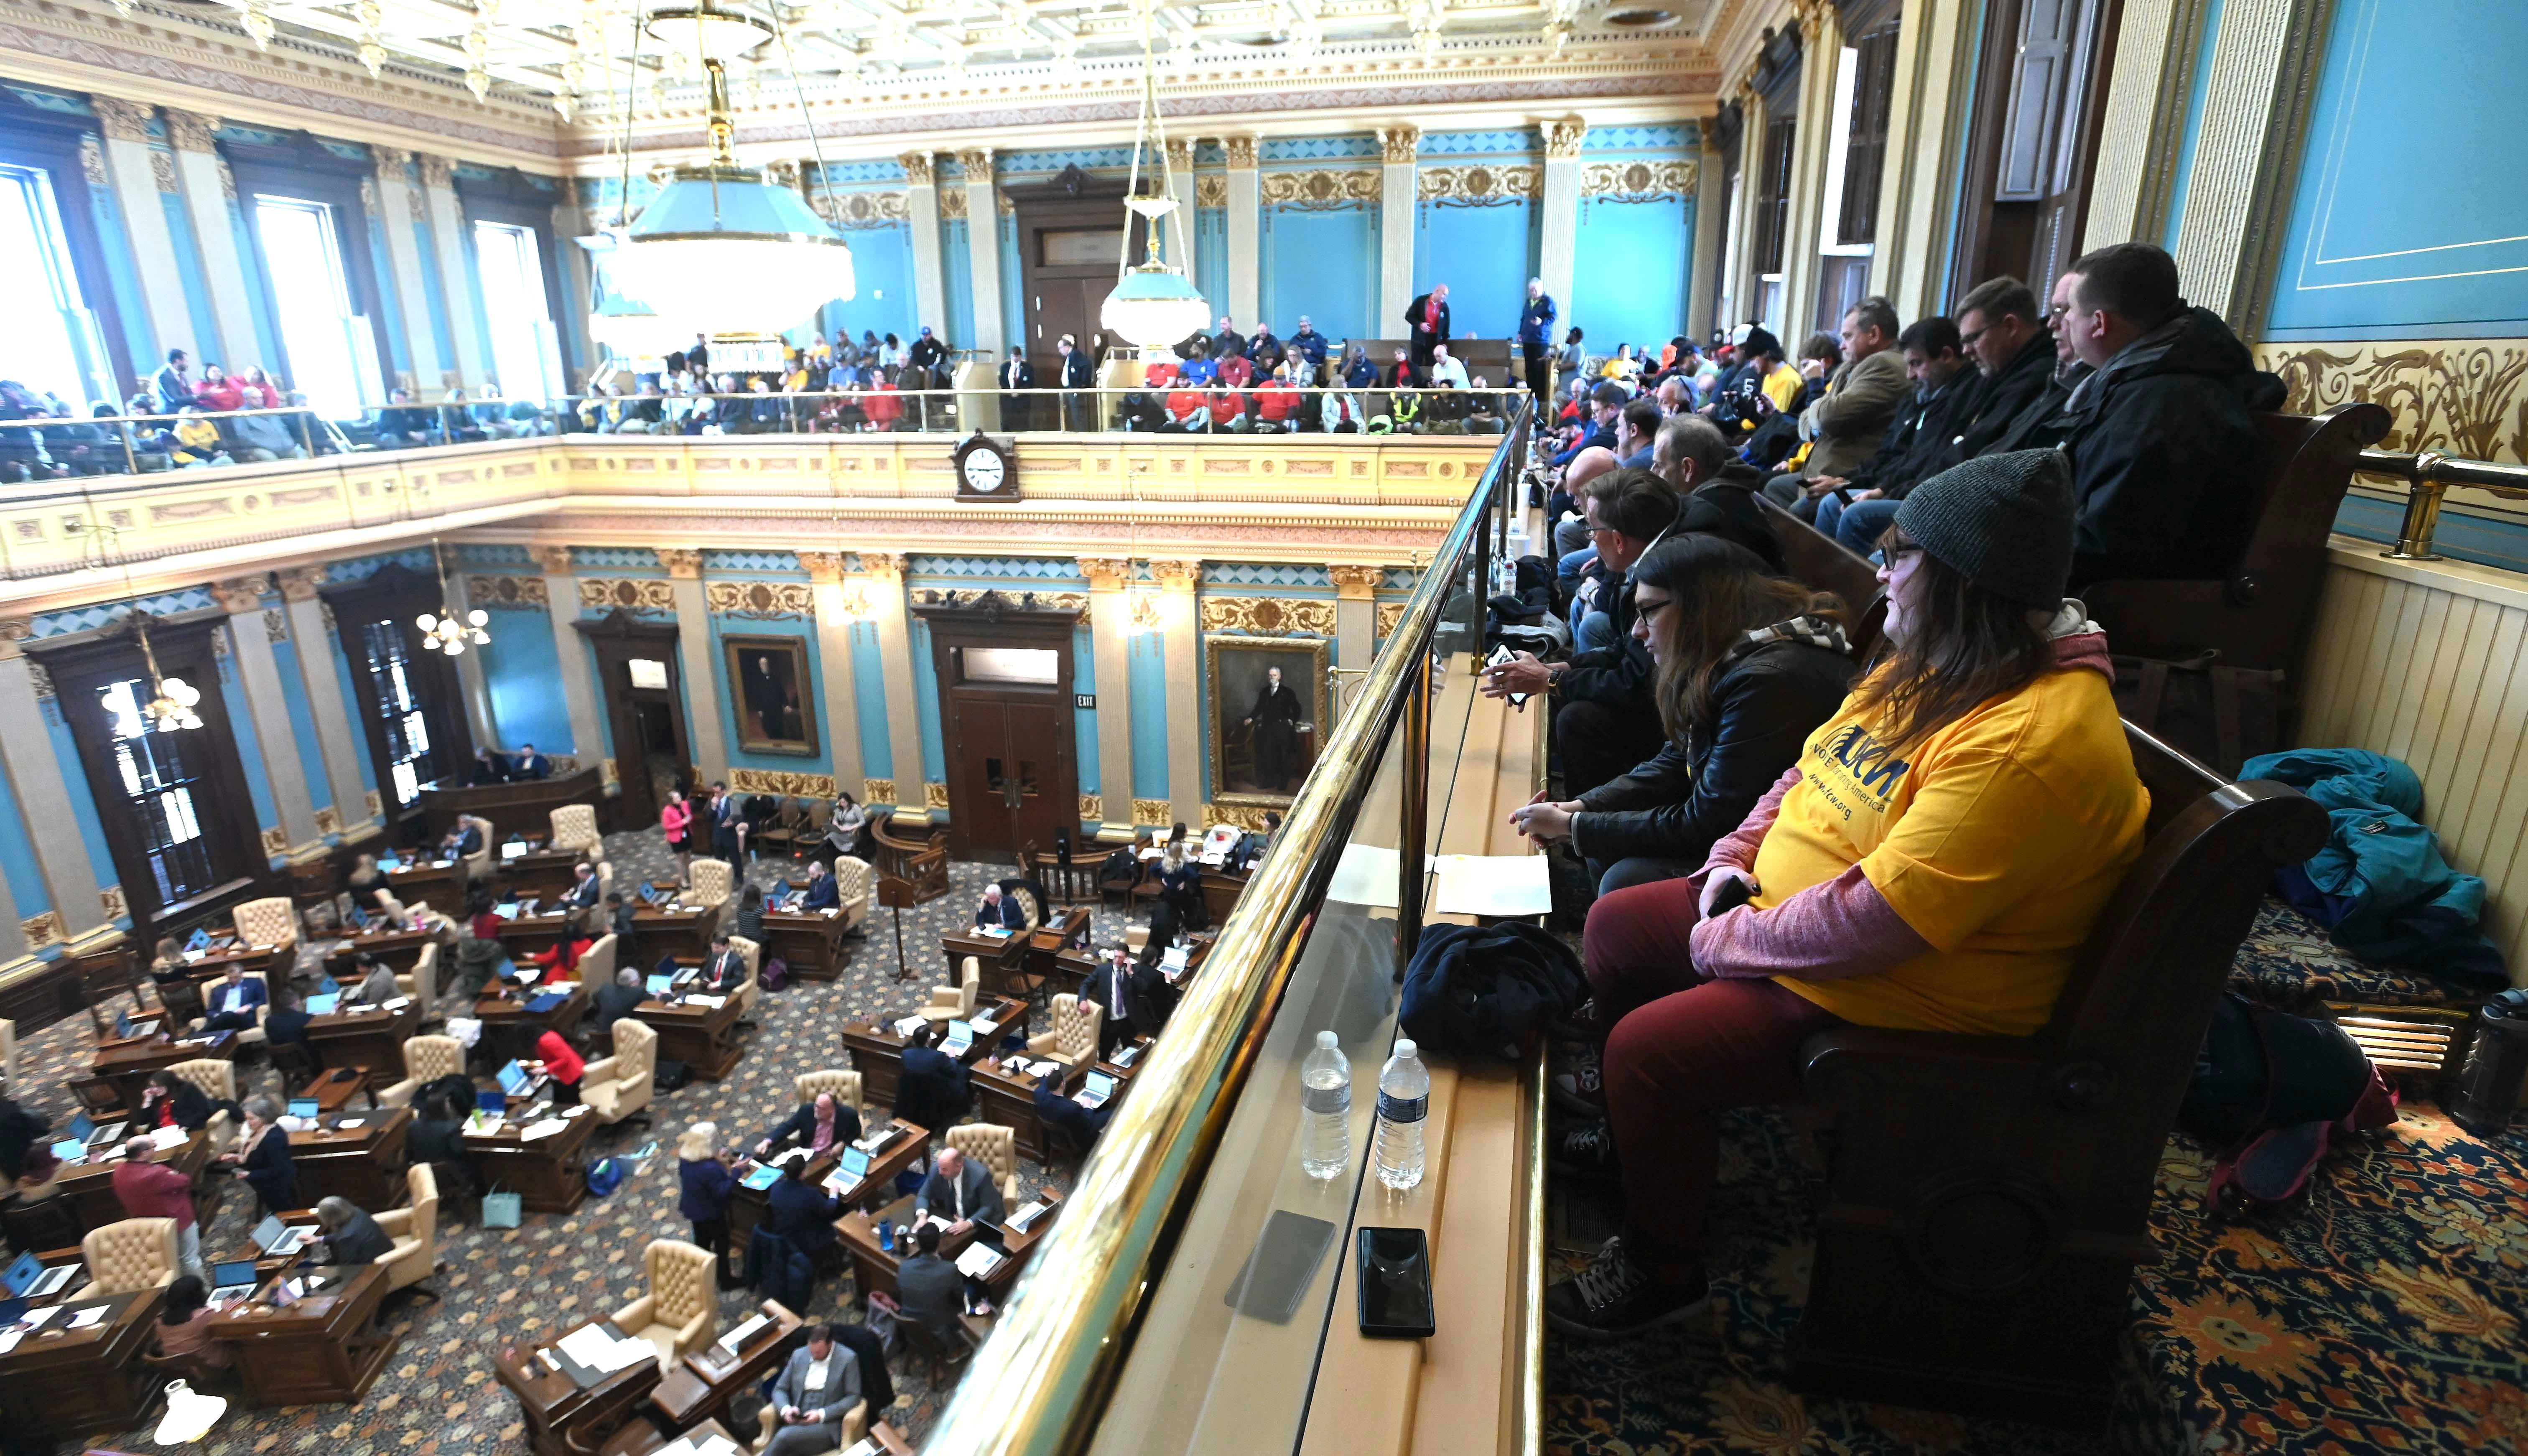 Union members and supporters talk as they wait for the Senate to vote, Tuesday afternoon, March 14, 2023.